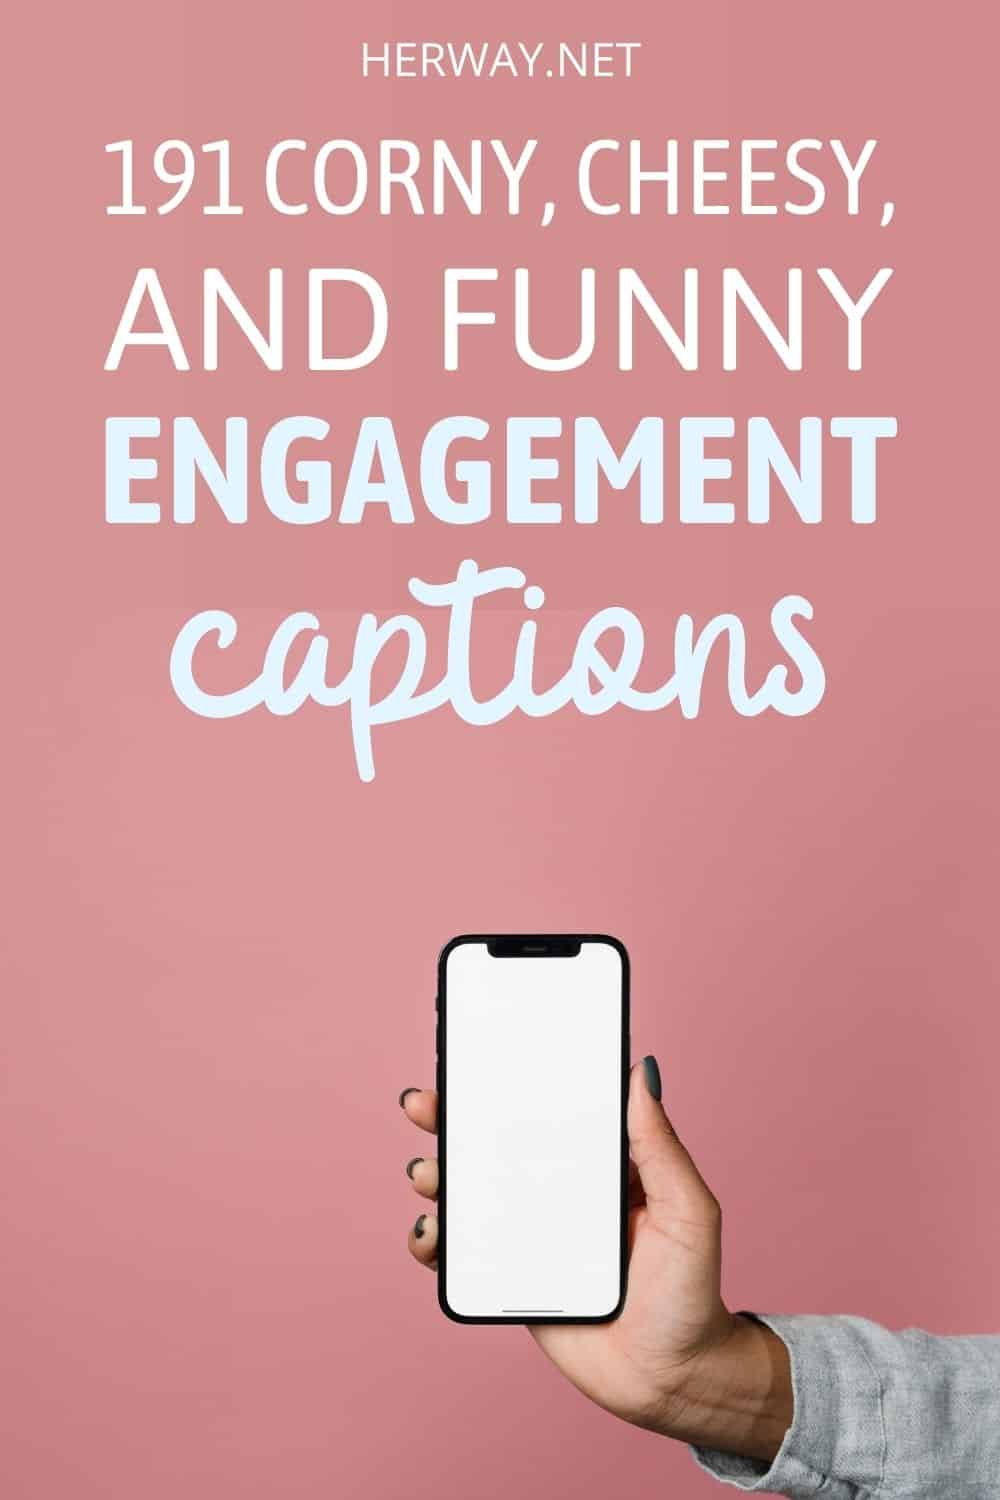 191 Funny Engagement Captions, Song Lyrics, And Quotes